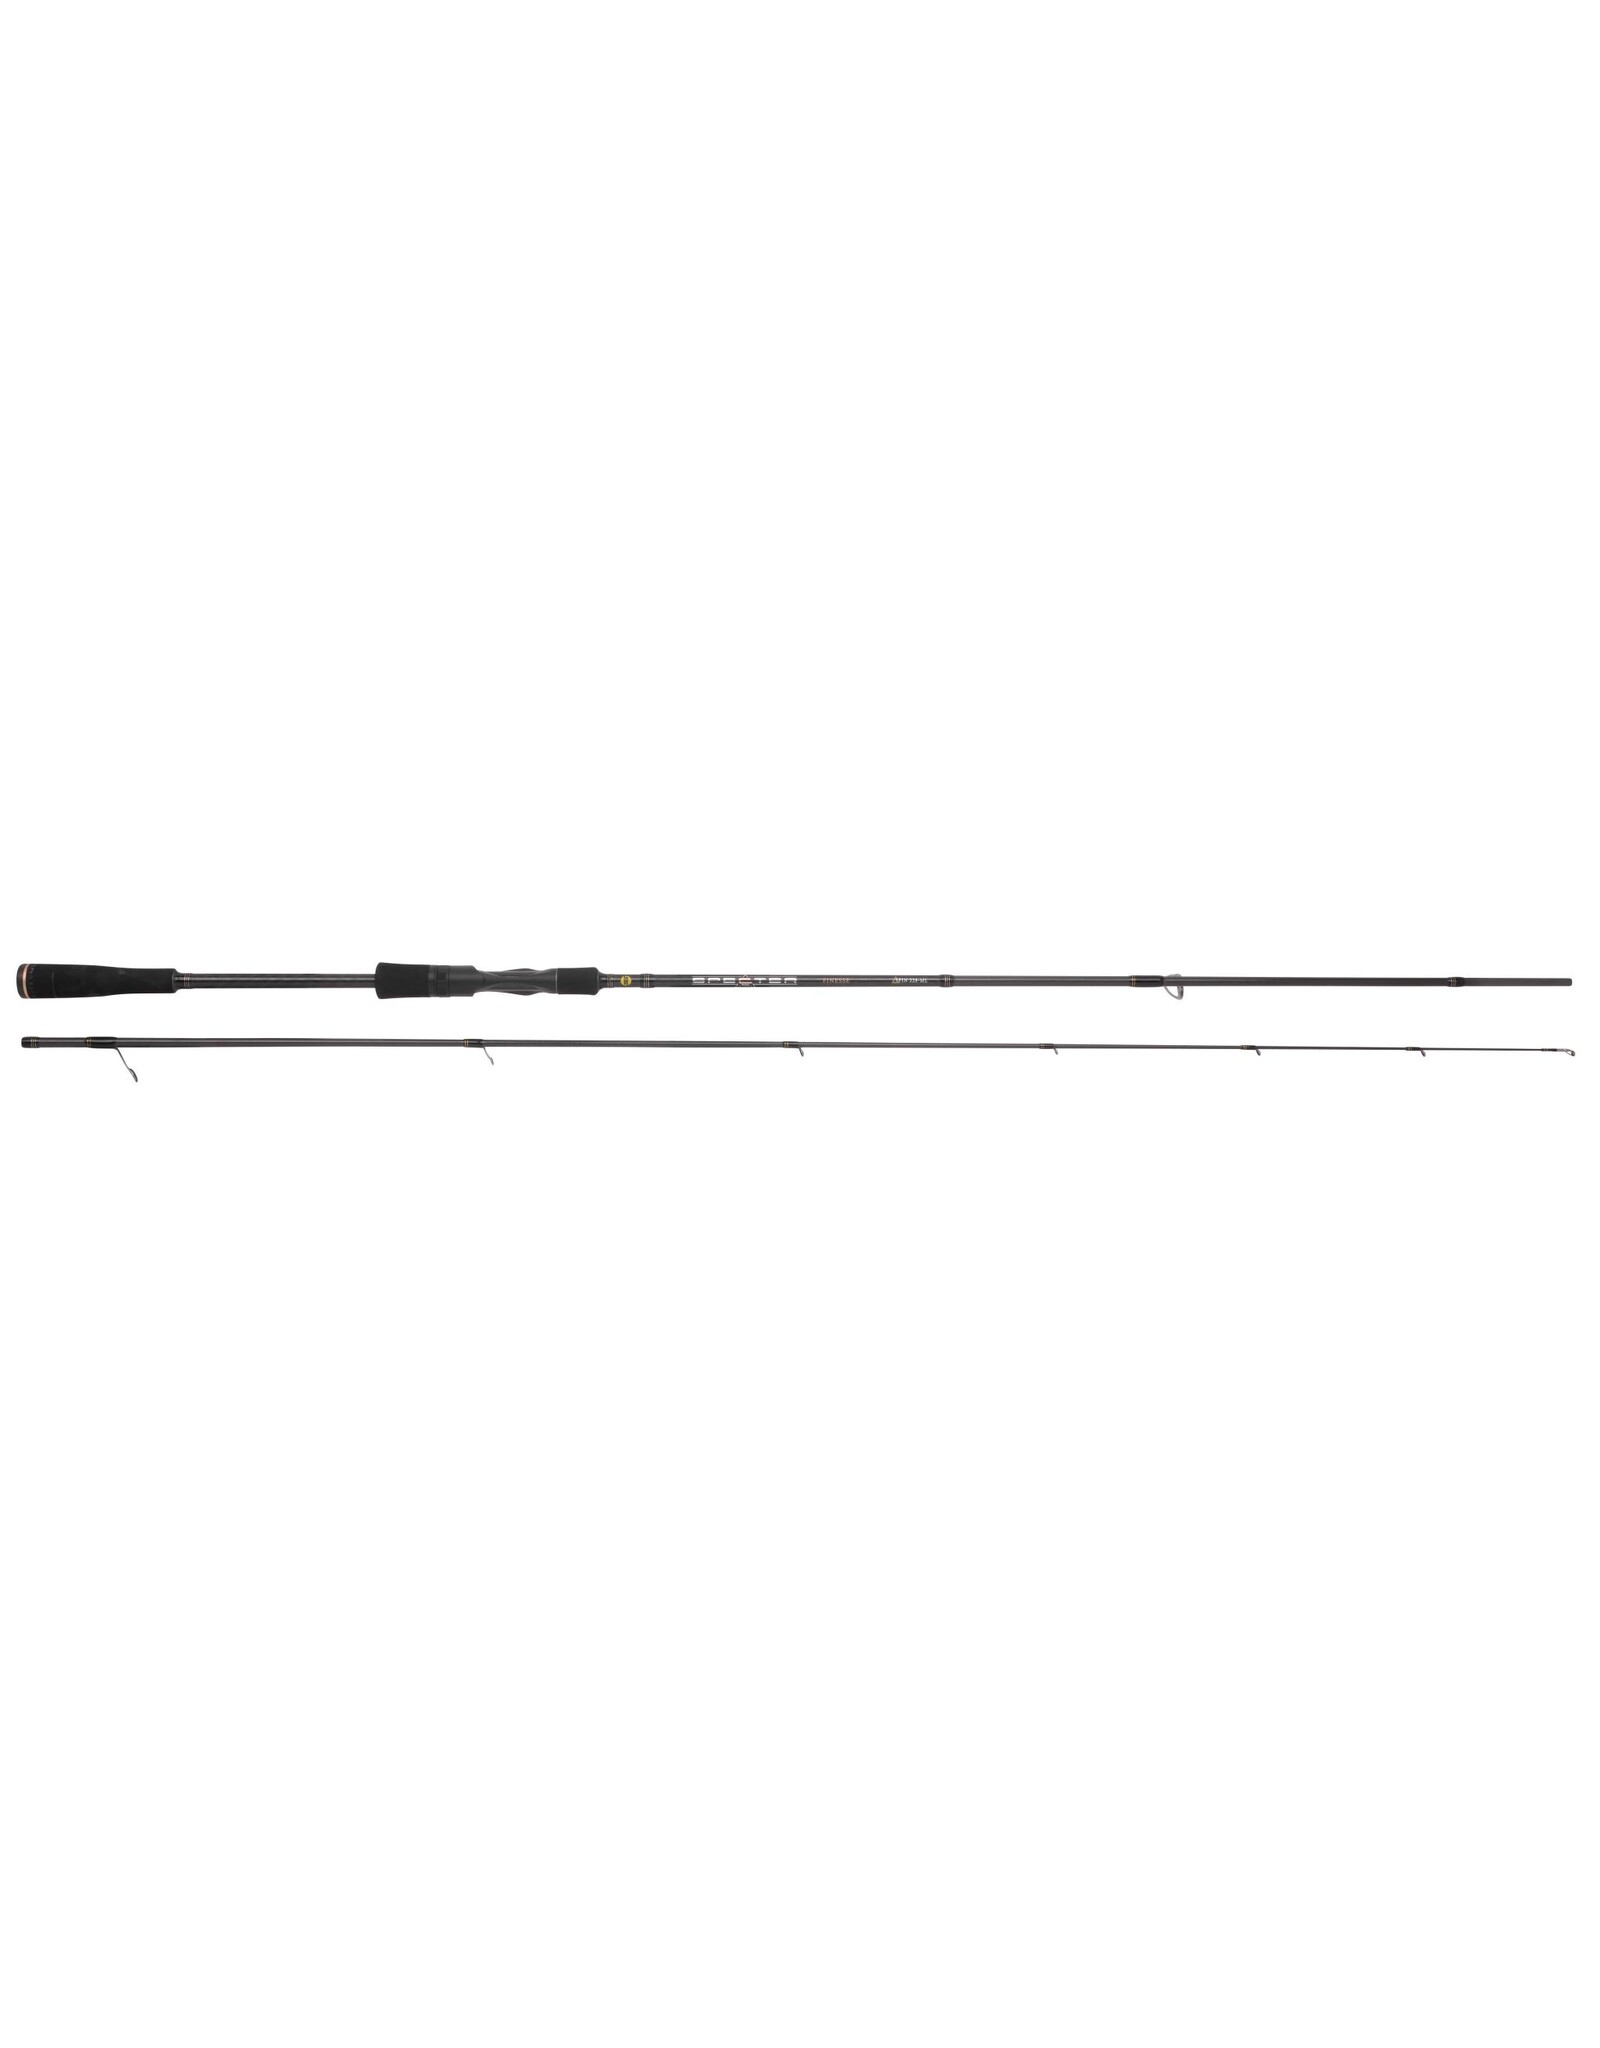 Spro SPECTER FINESSE SPIN 2.90M 10-28G